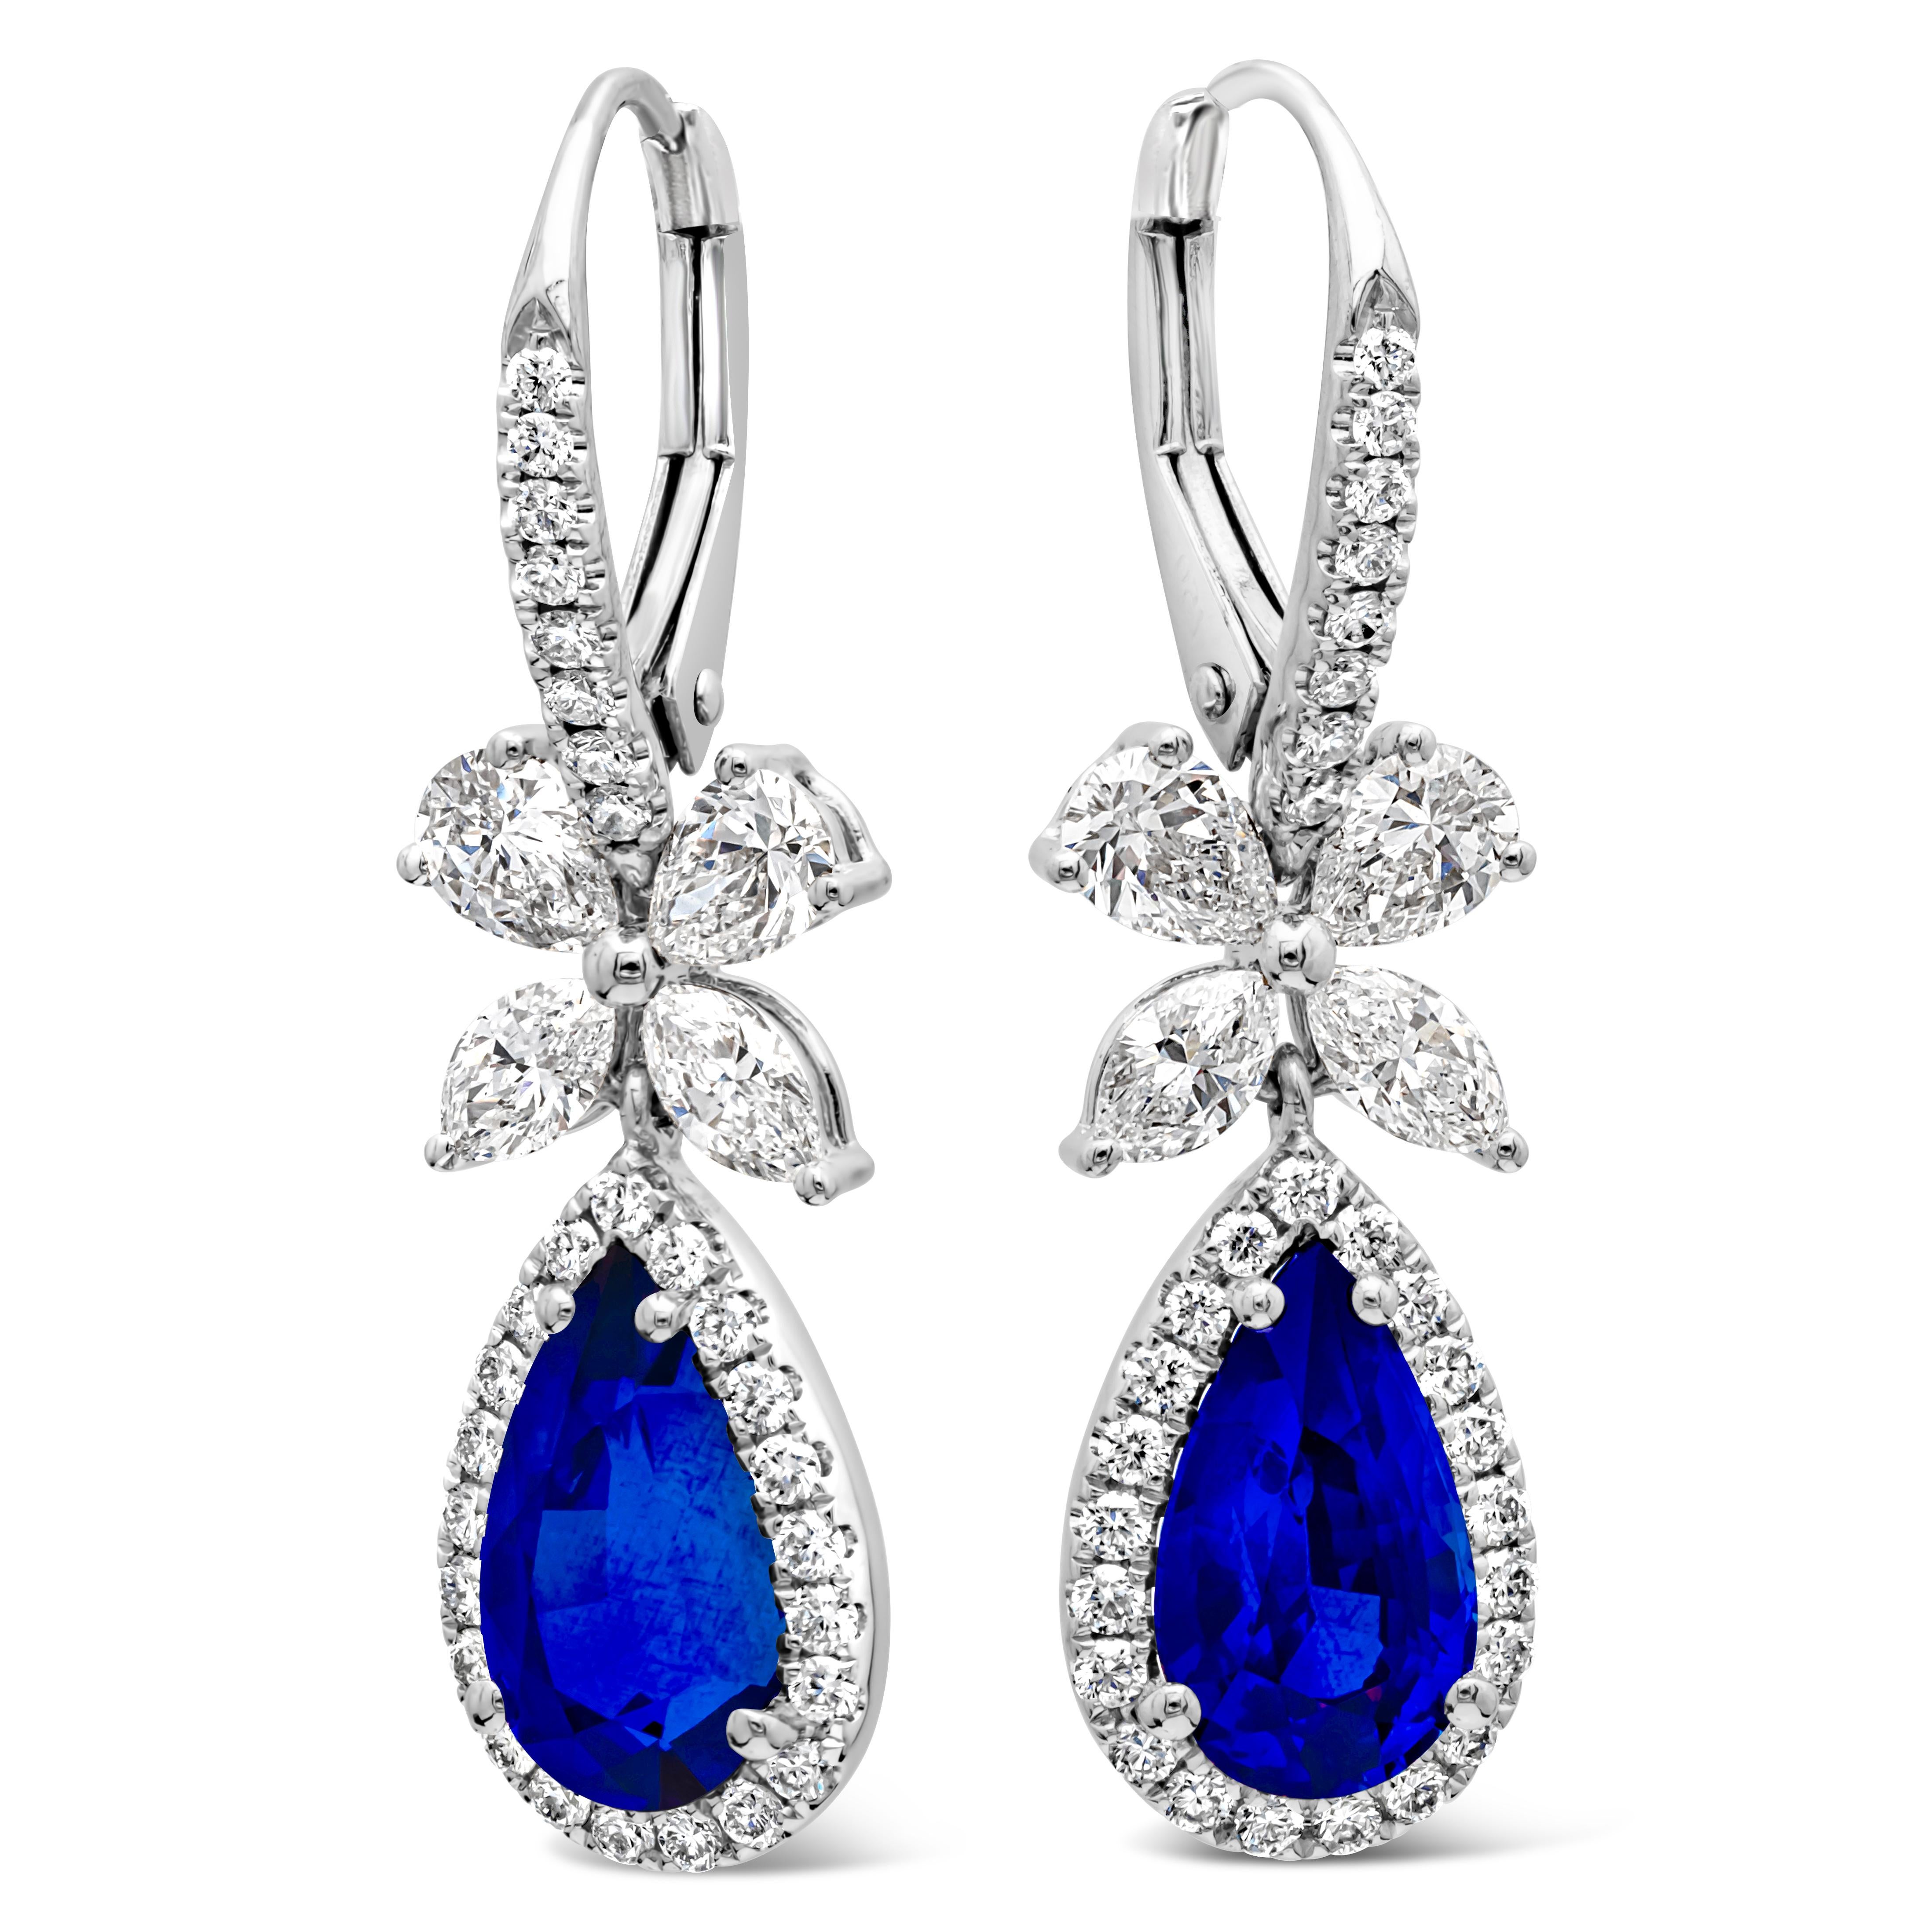 Contemporary 2.56 Carats Total Pear Shape Blue Sapphire and Mixed Cut Diamond Dangle Earrings For Sale